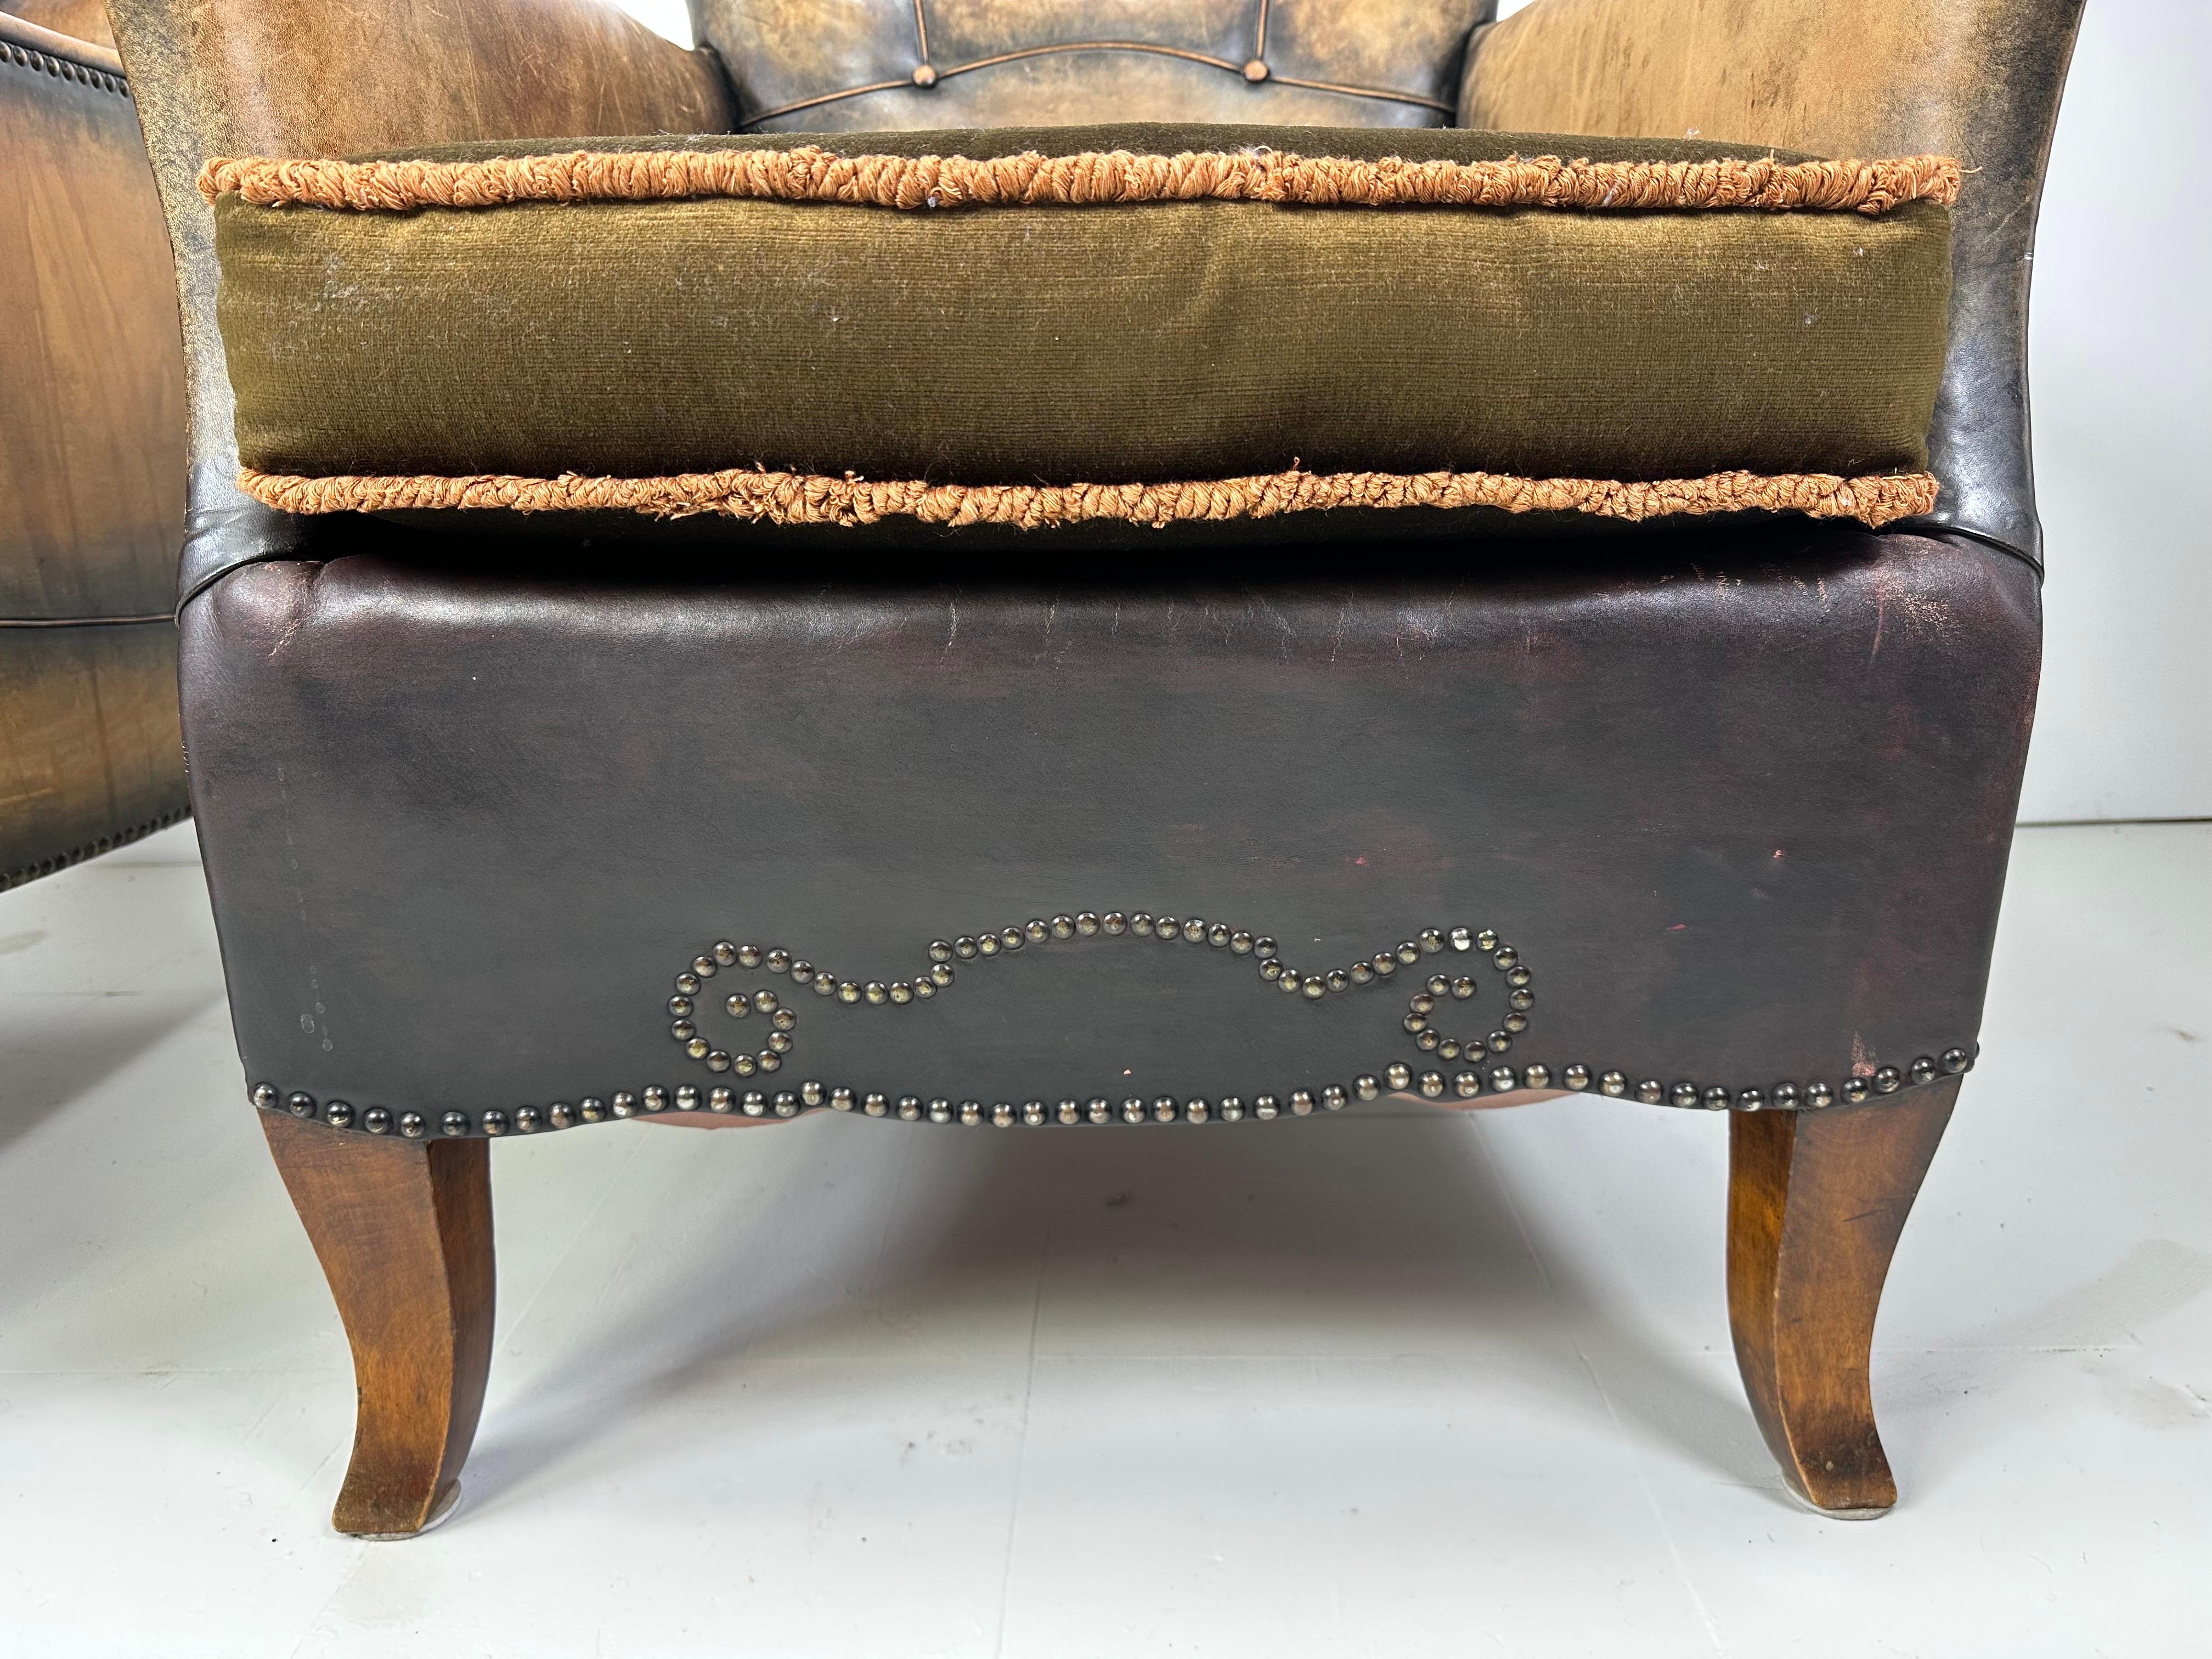 Pair of 1930’s European Leather Lounge In Good Condition For Sale In Turners Falls, MA